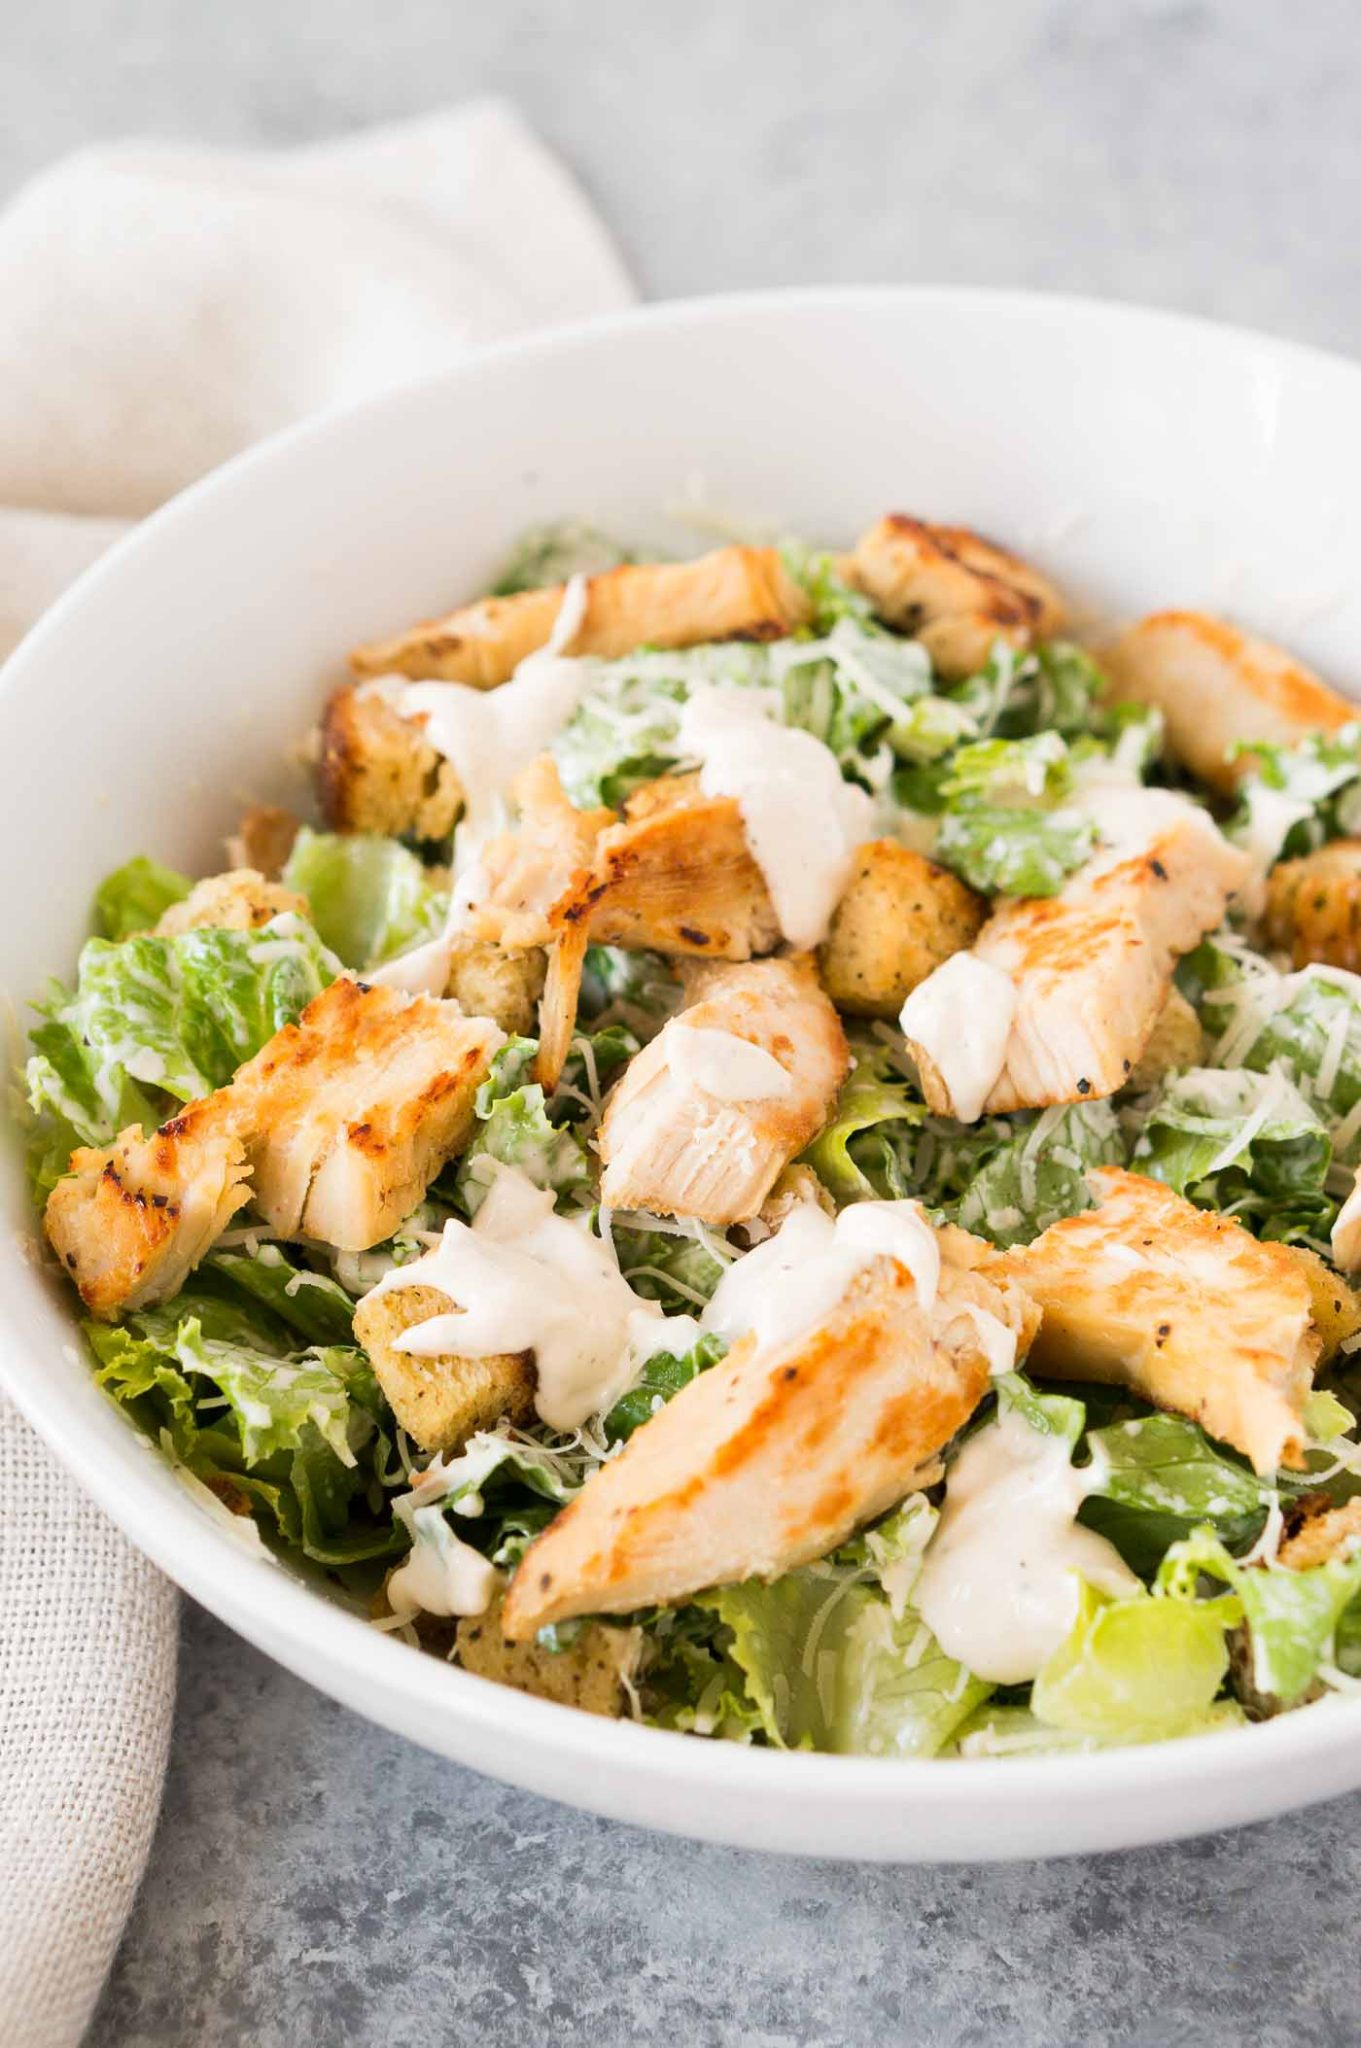 Chicken Caesar salad with homemade Caesar dressing in a bowl